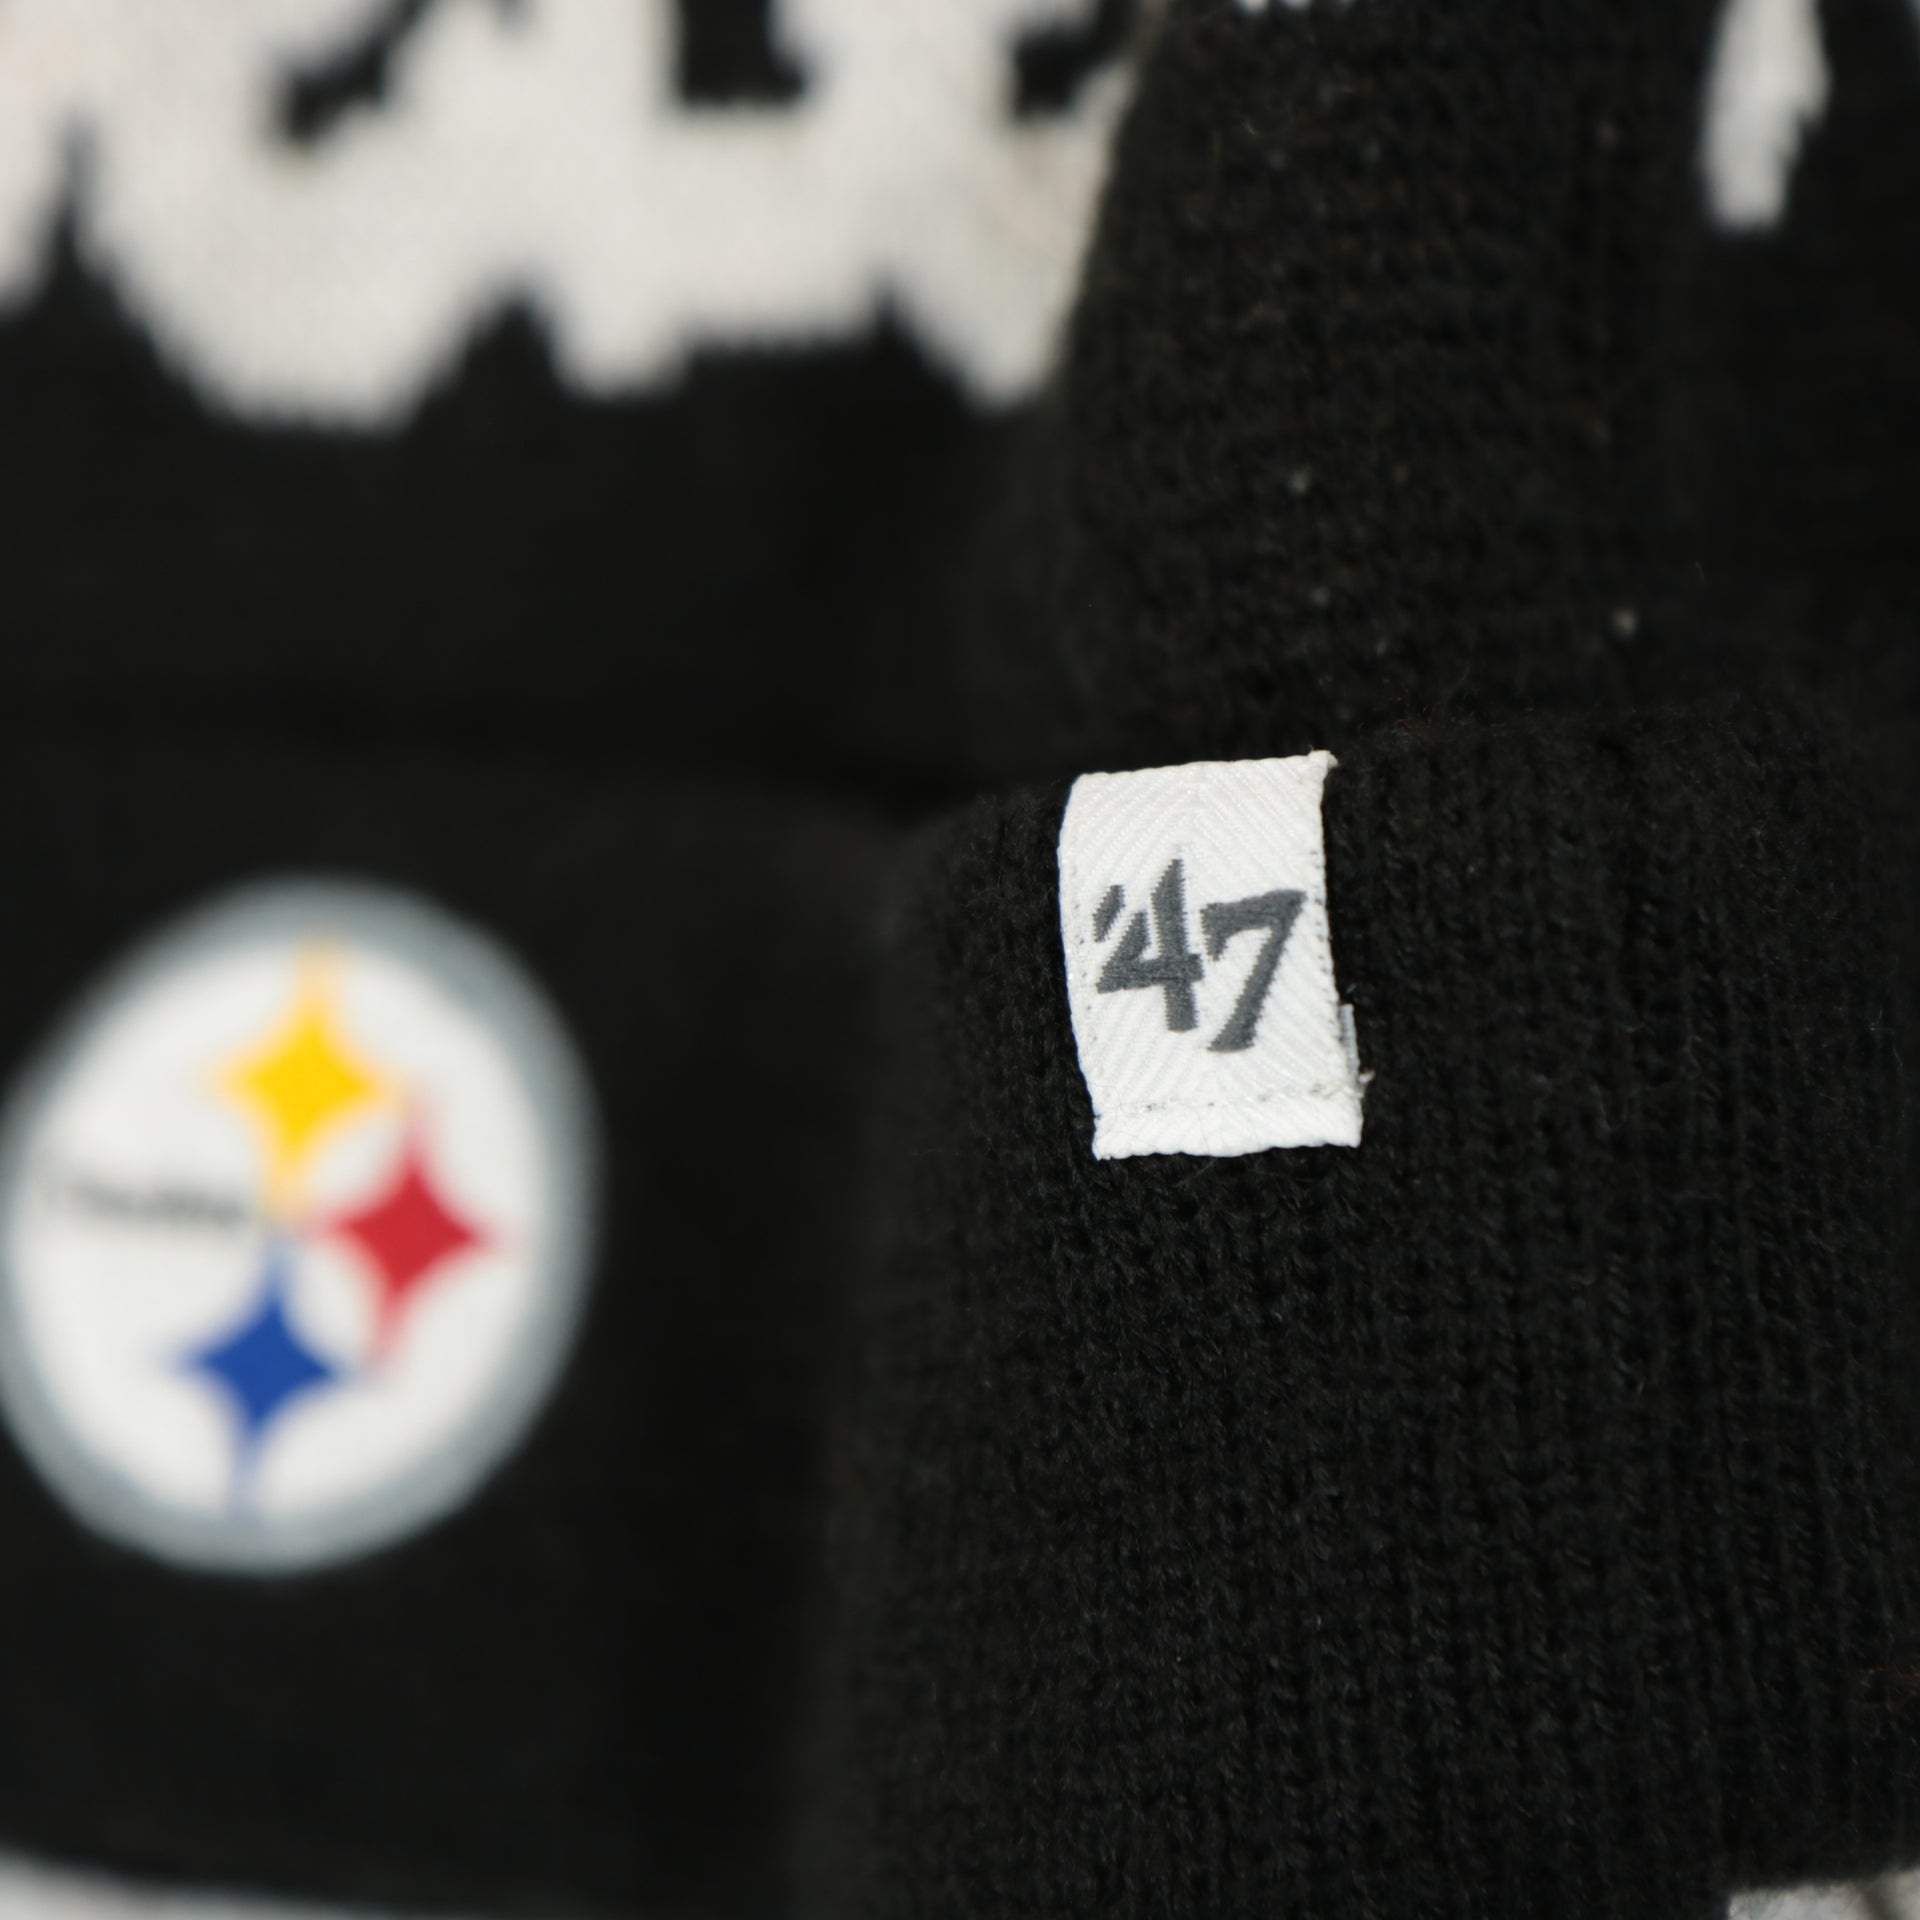 47 brand label on the Pittsburgh Steelers Youth Sized "Underdog" Knit Pom Winter Beanie